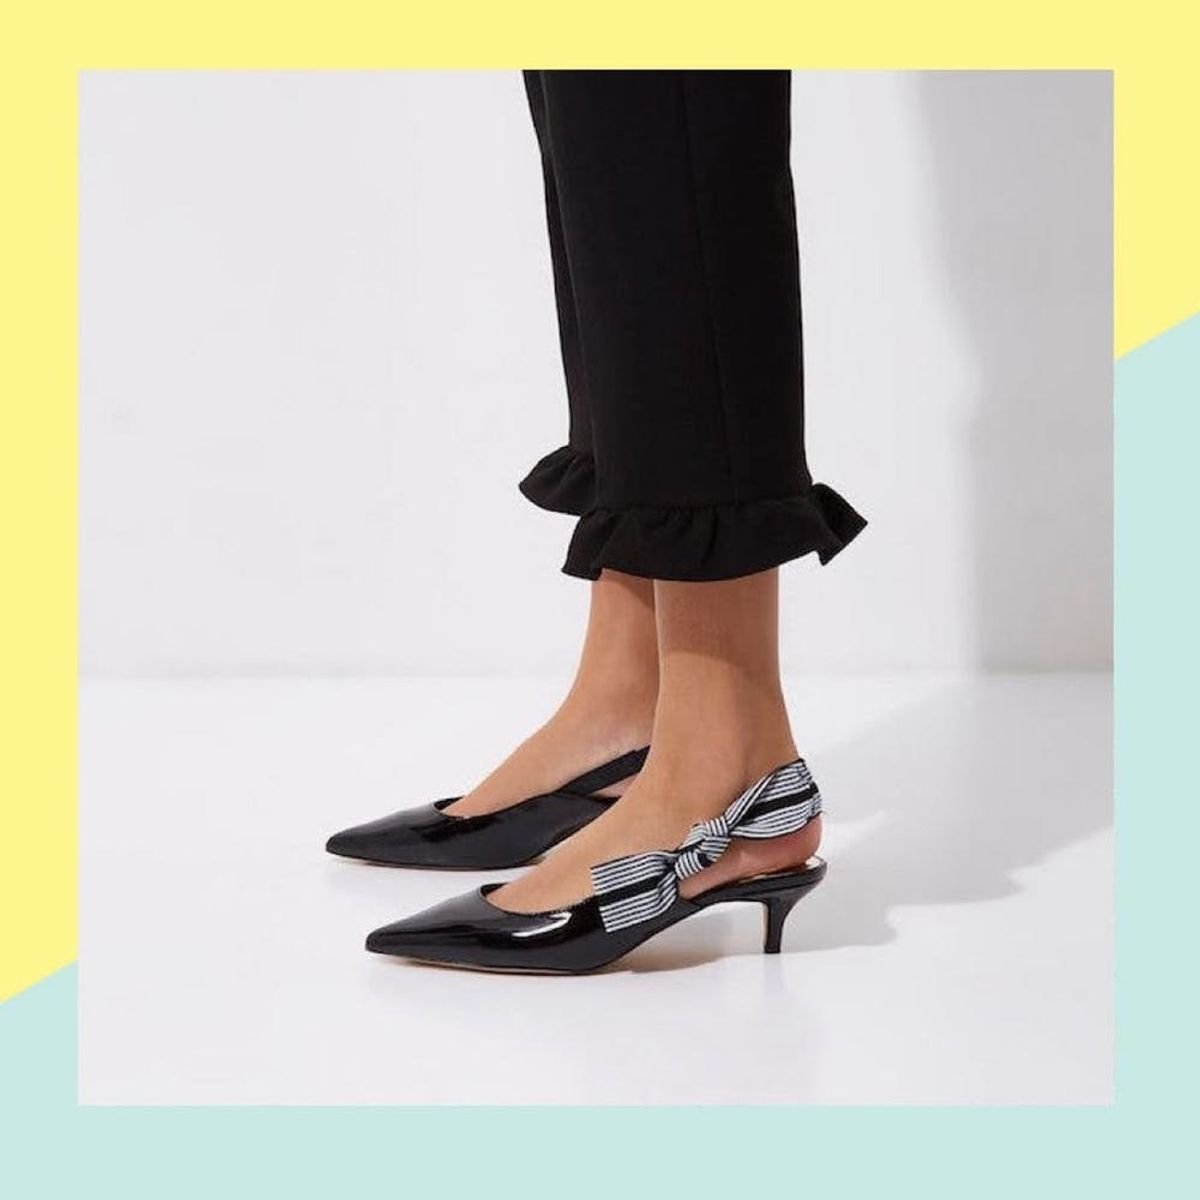 10 Pairs of Slingback Shoes That Will Take You Straight to Fall 